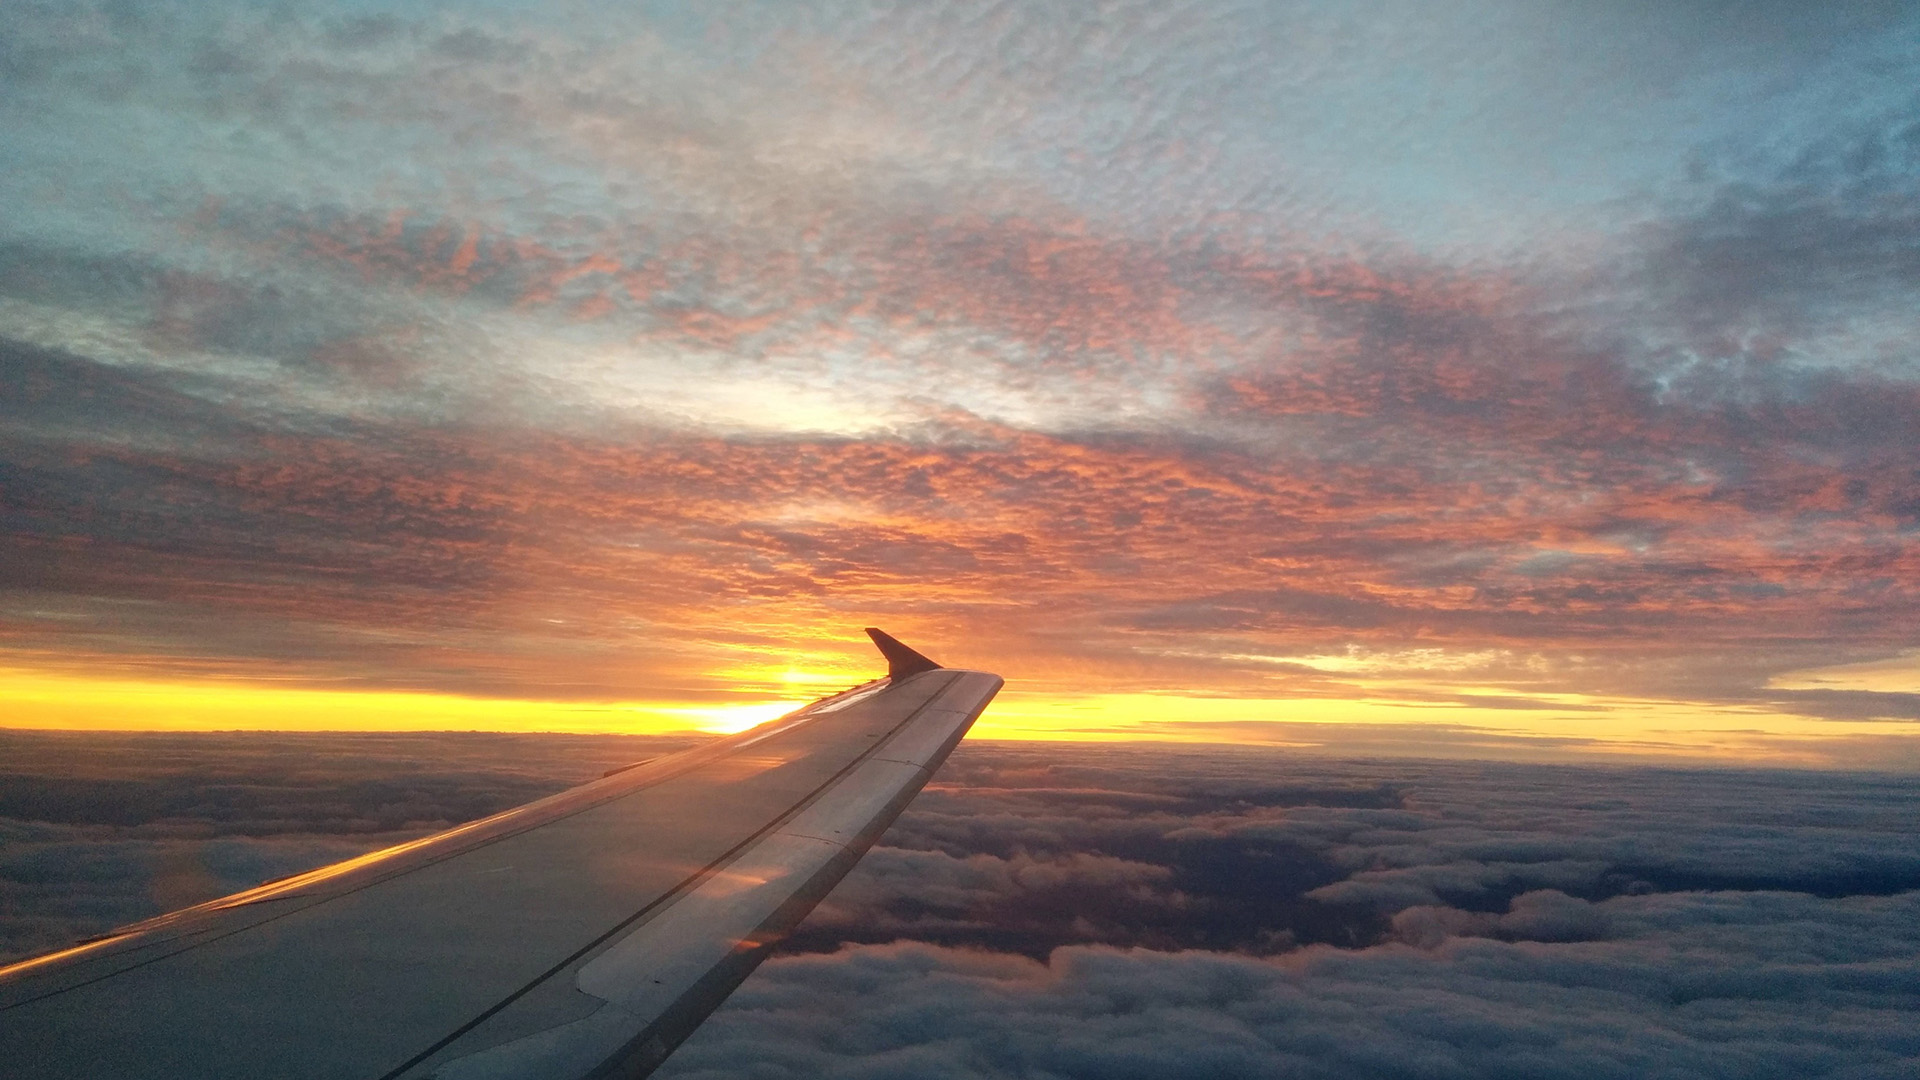 A view of an airplane wing against a cloudy sunset sky.